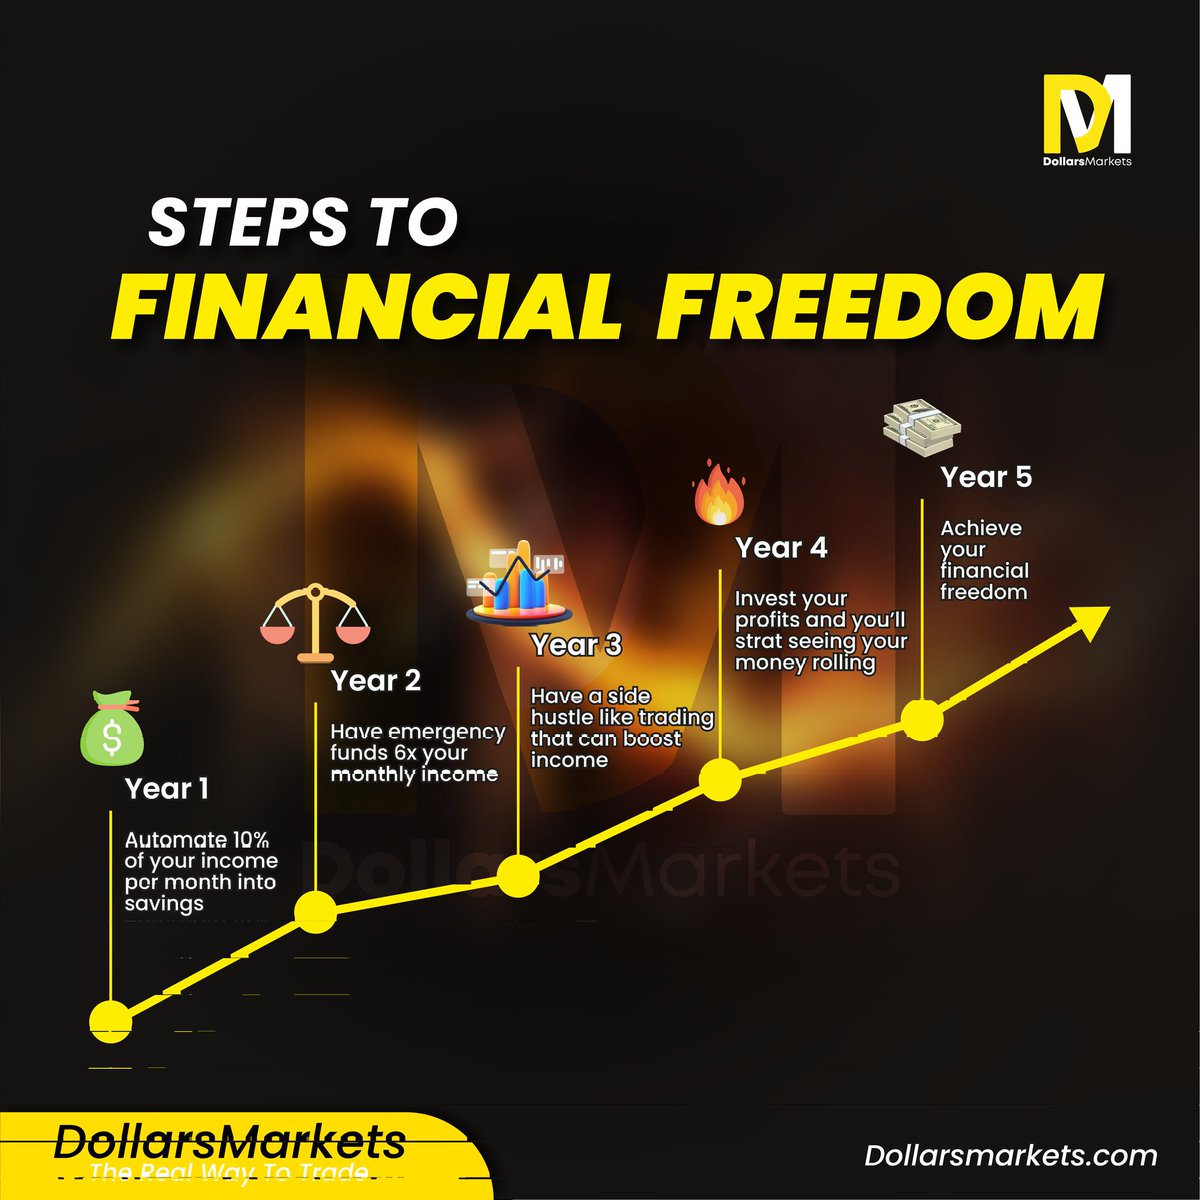 PLANNING FINANCIAL FREEDOM IN FIVE YEARS 😎 💵

Anyone can do it with a focused mindset ‼️

Claim your welcome bonus here: 
dollarsmarkets.com/mt5-welcome-bo…

#dollarsmarkets #trustedbrokers #dollarsmarkets_motivation #dollarsmarketsnews #globalmarkets